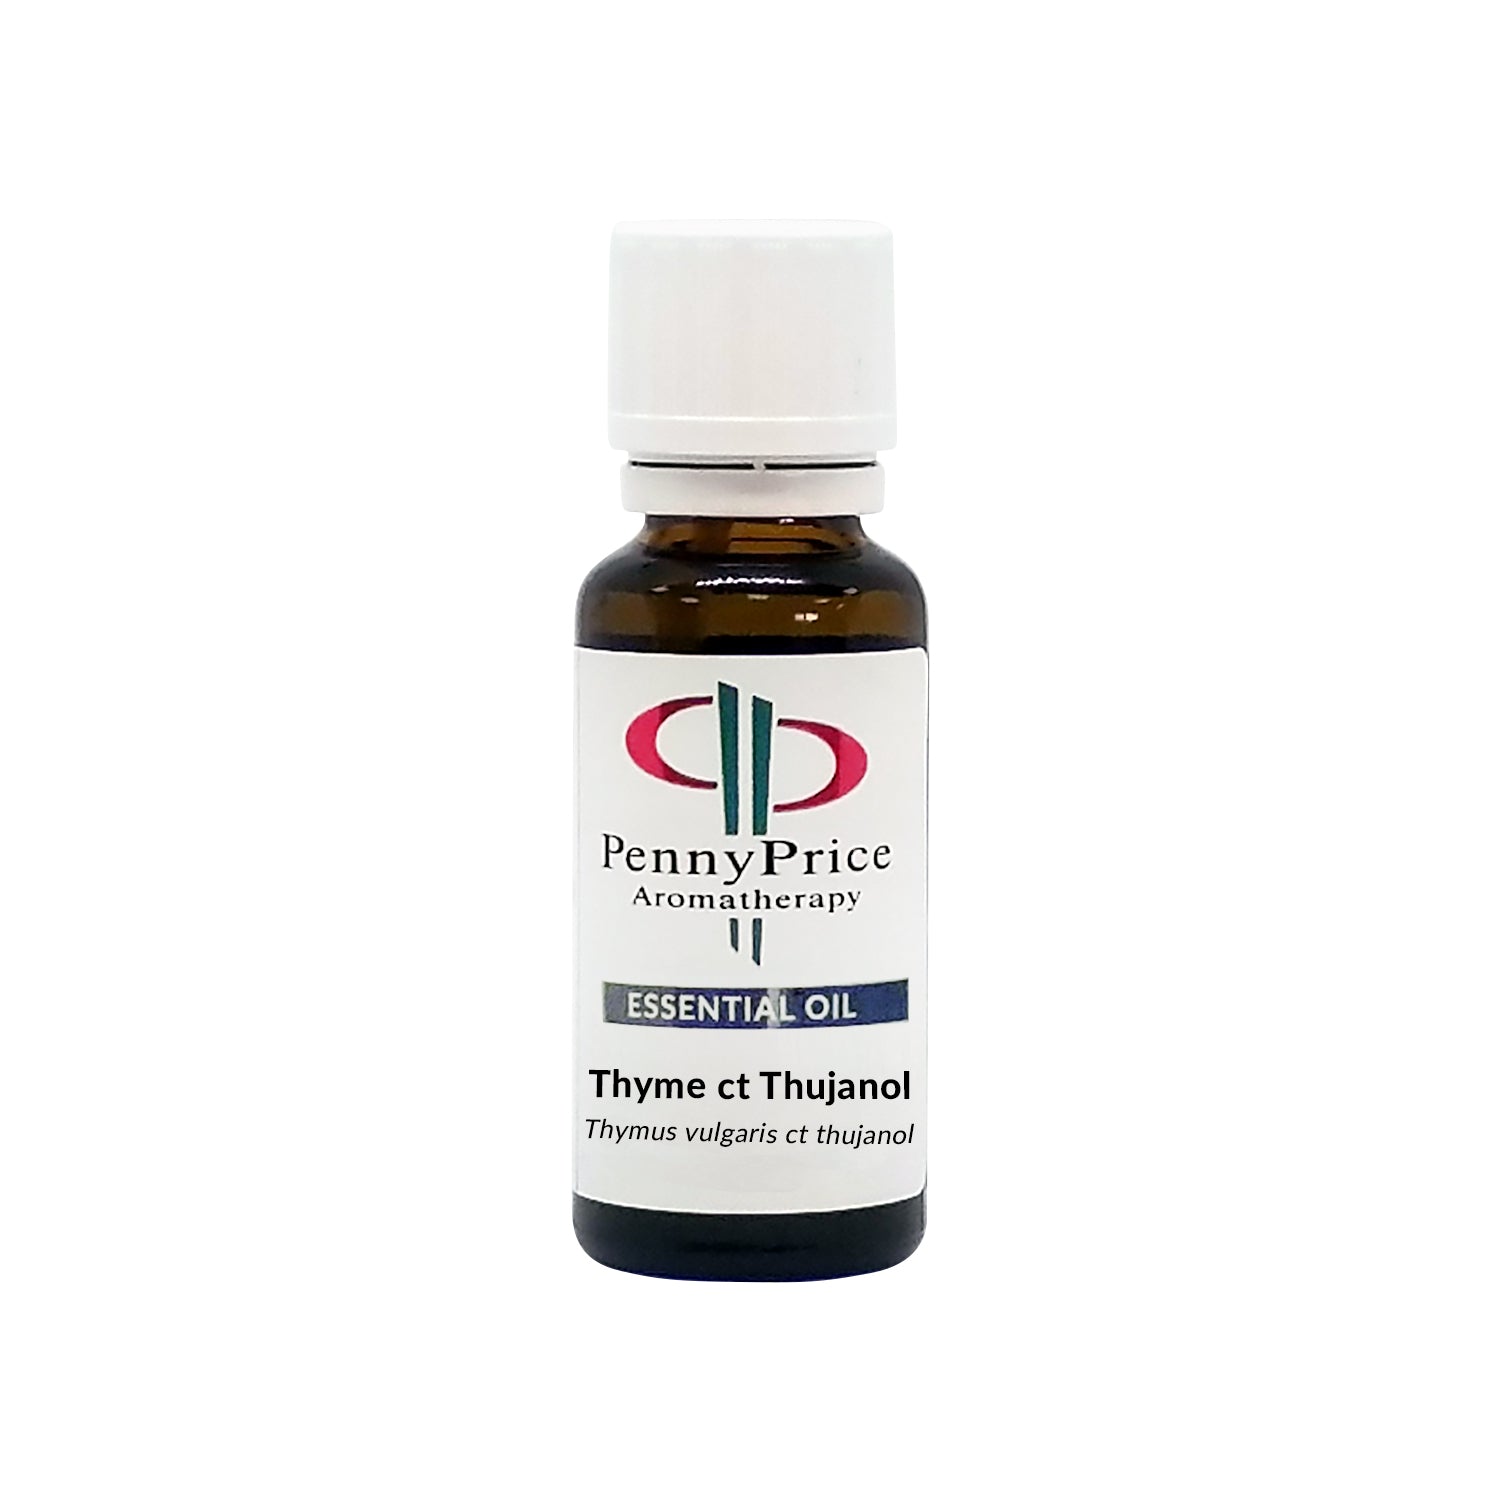 Thyme ct Thujanol Essential Oil